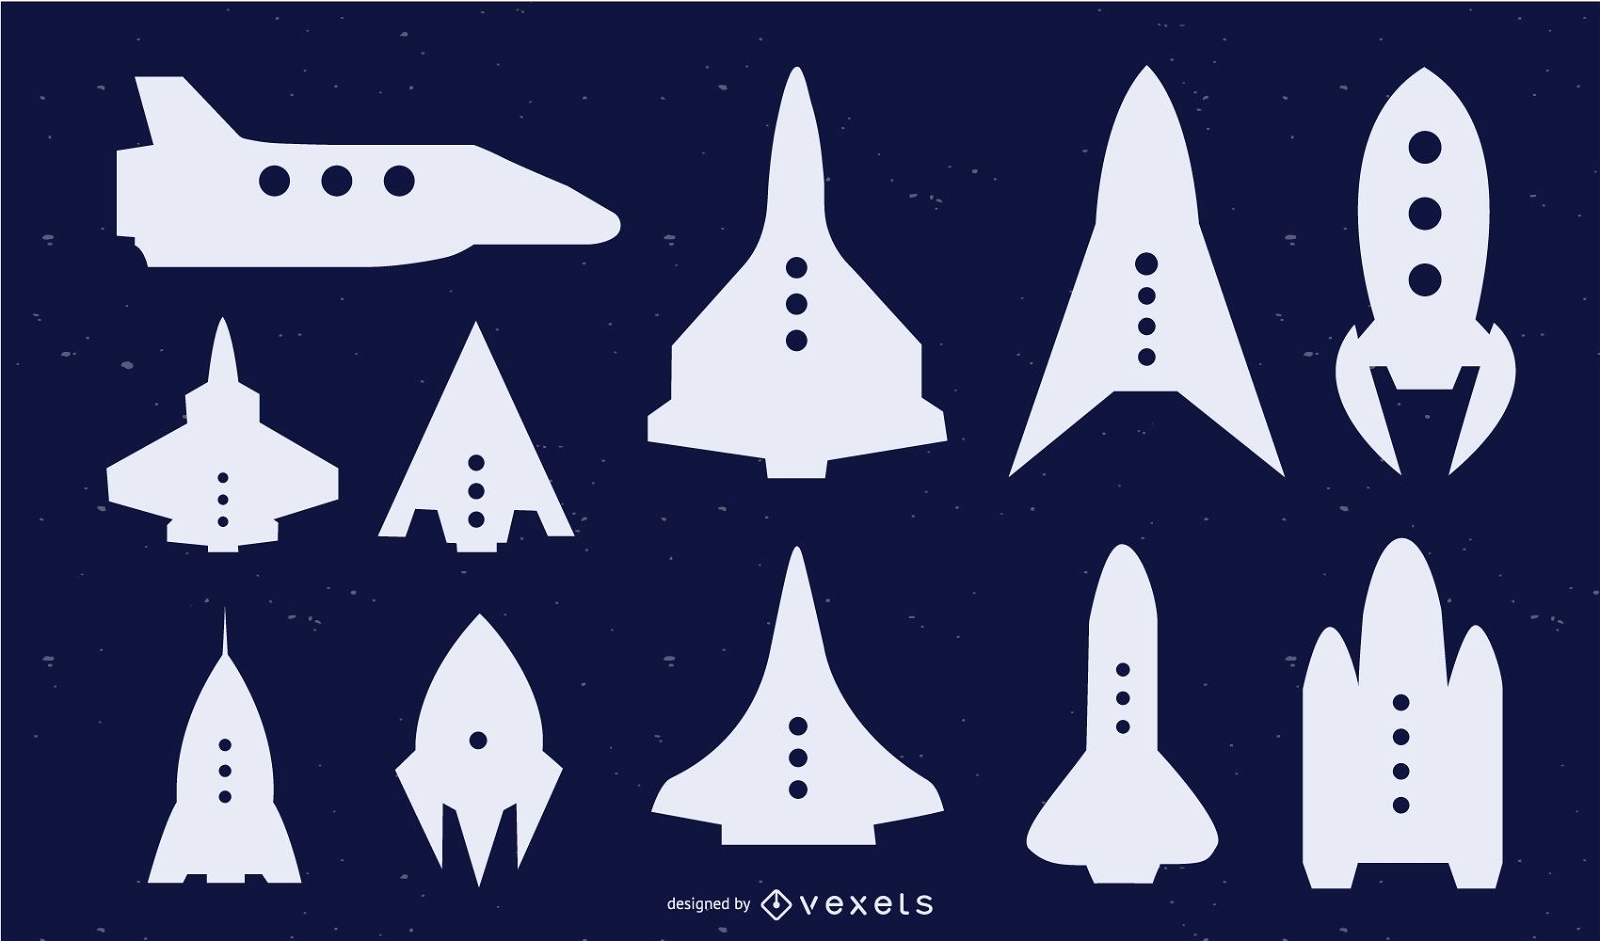 Space Shuttle Silhouette Graphic Set